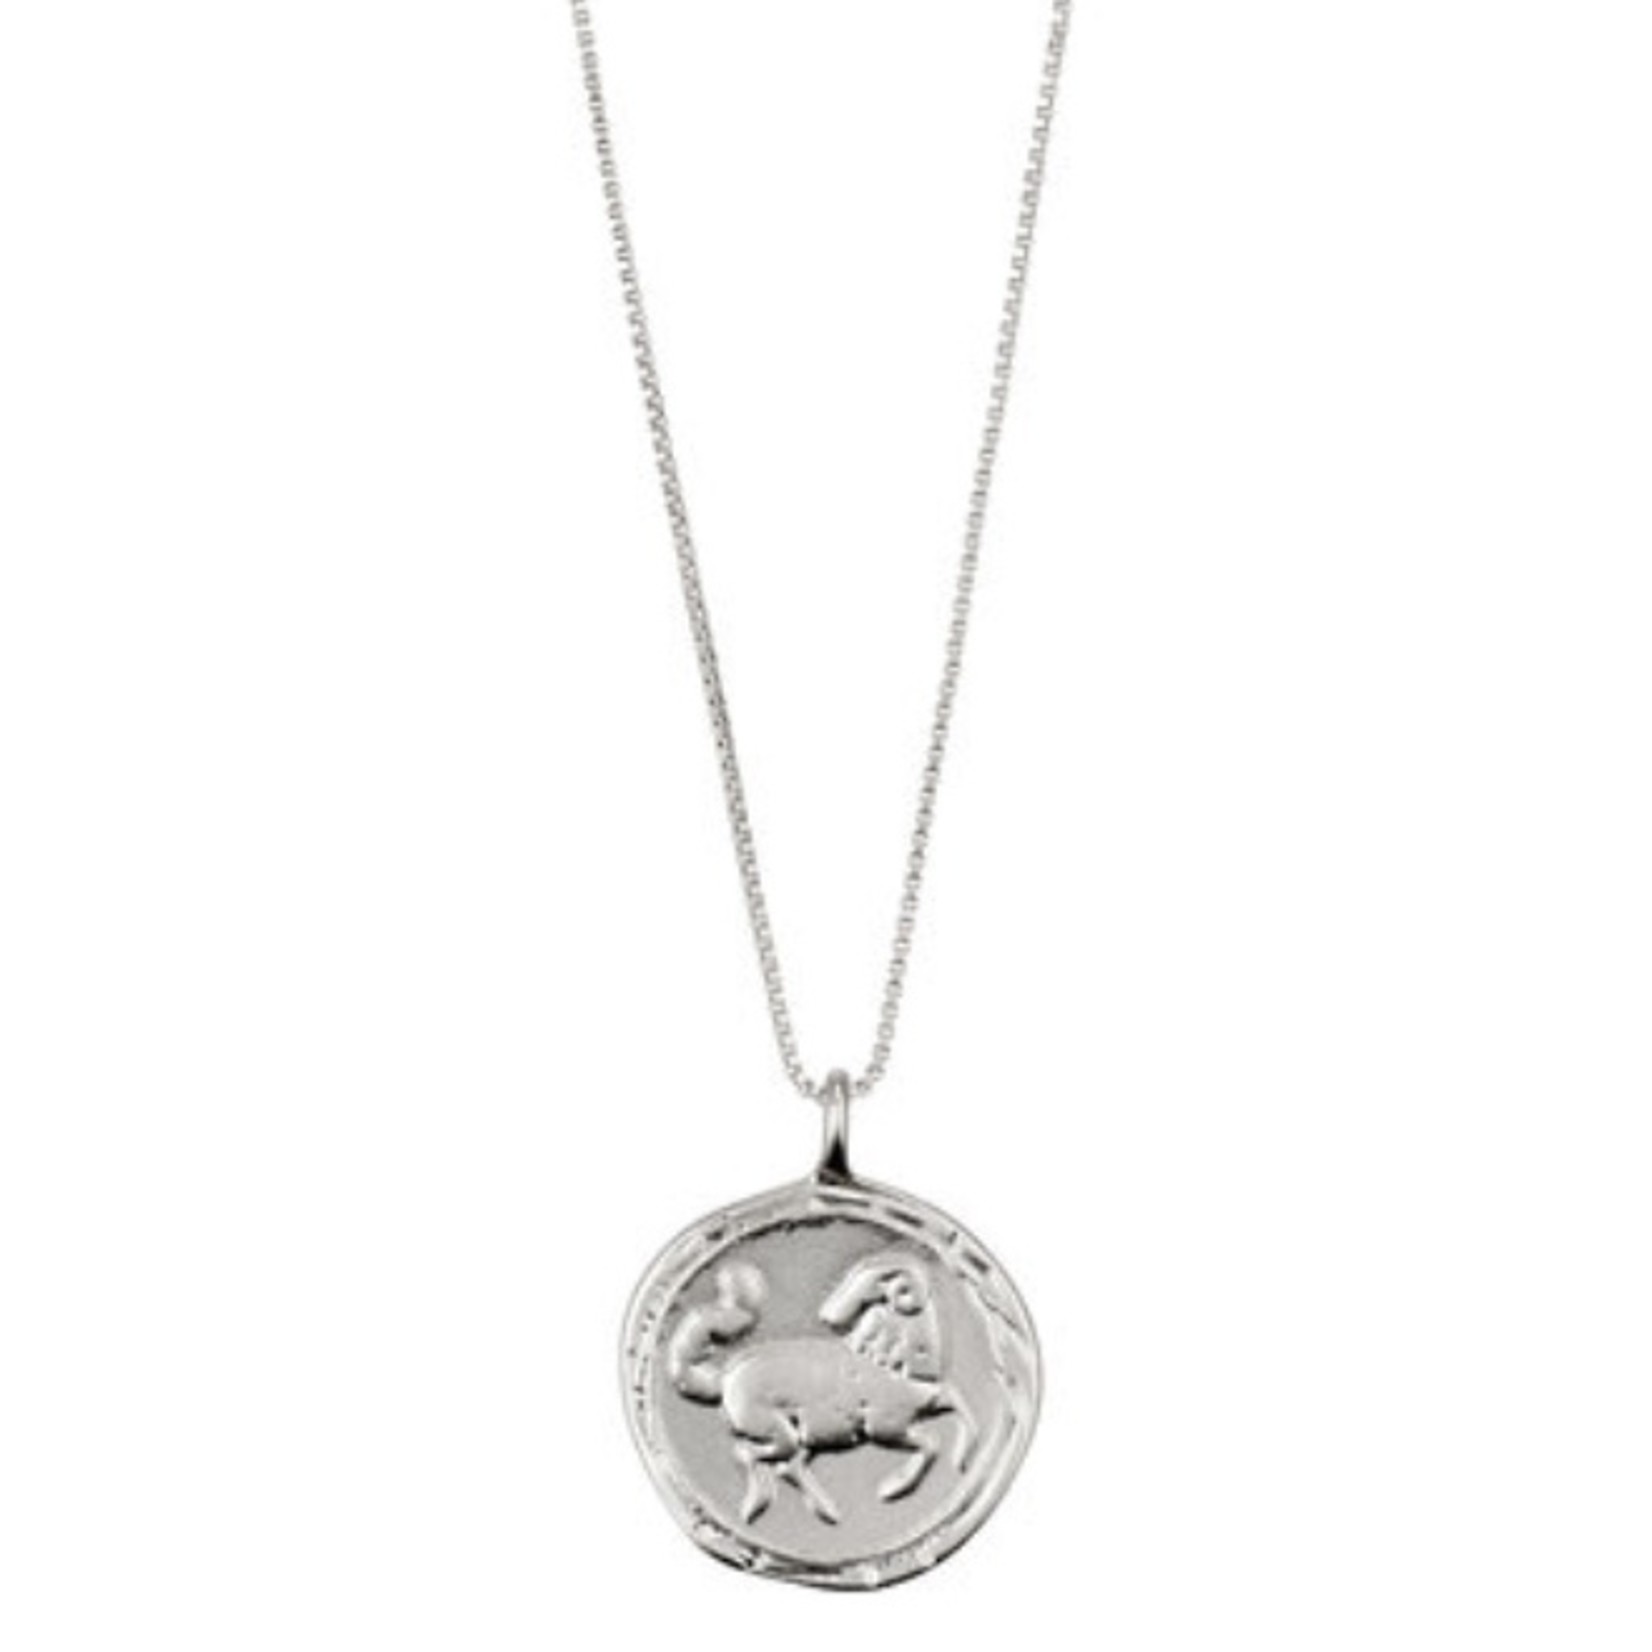 Pilgrim Necklace Silver Plated, Aries